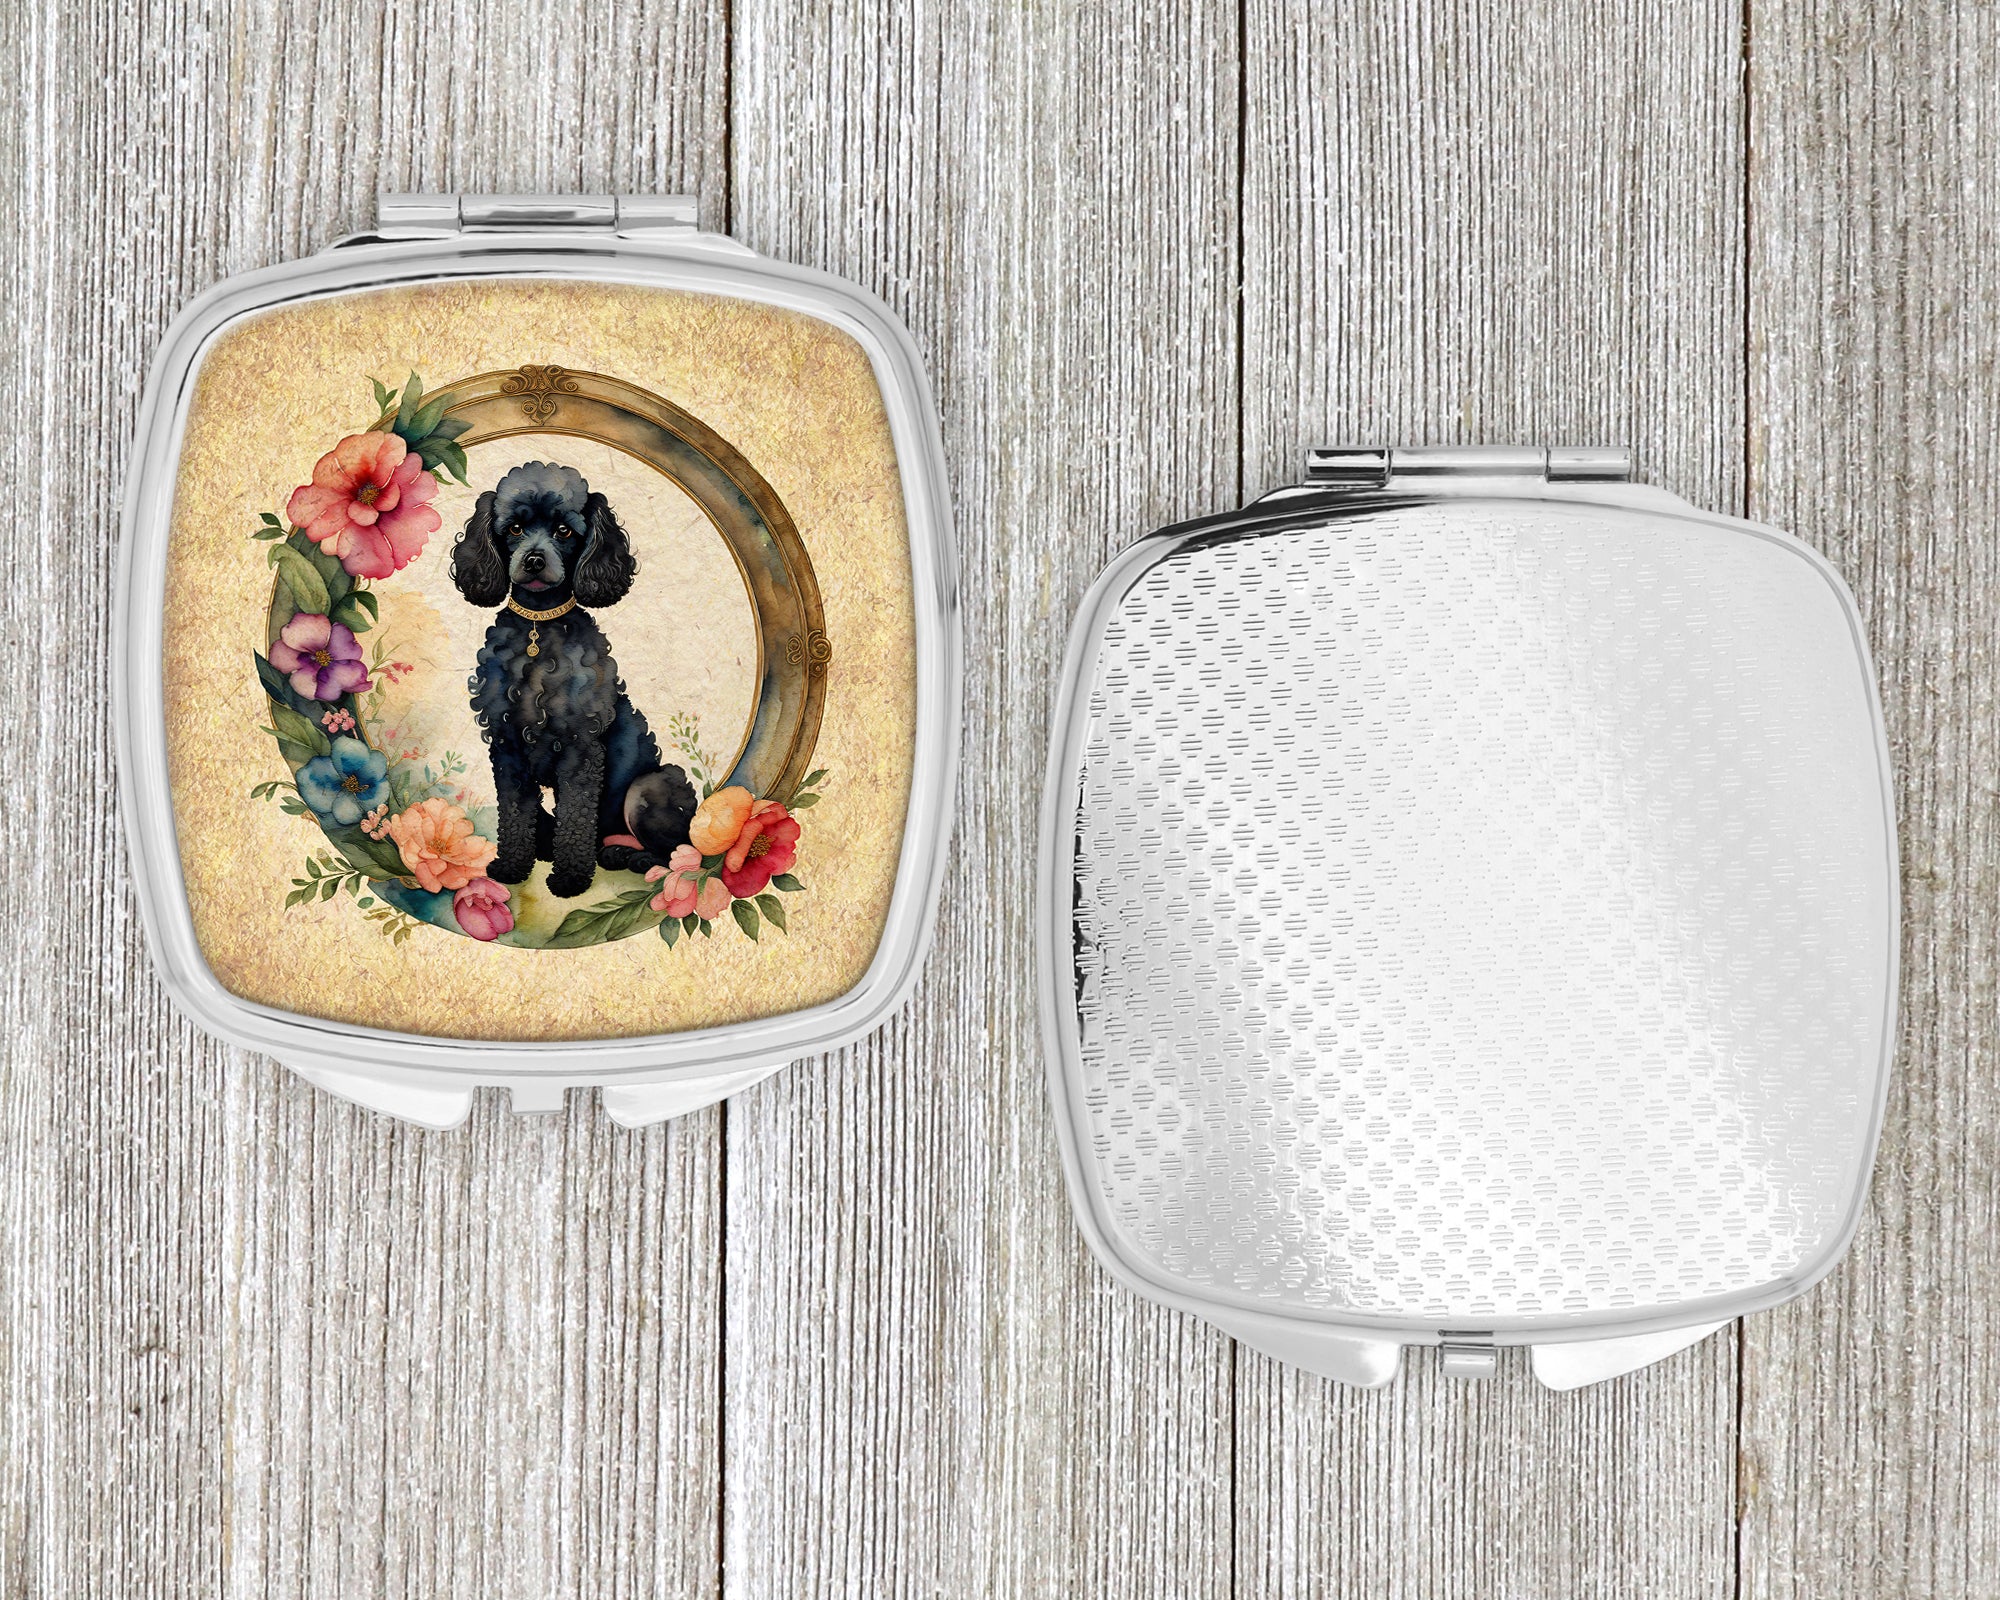 Black Poodle and Flowers Compact Mirror